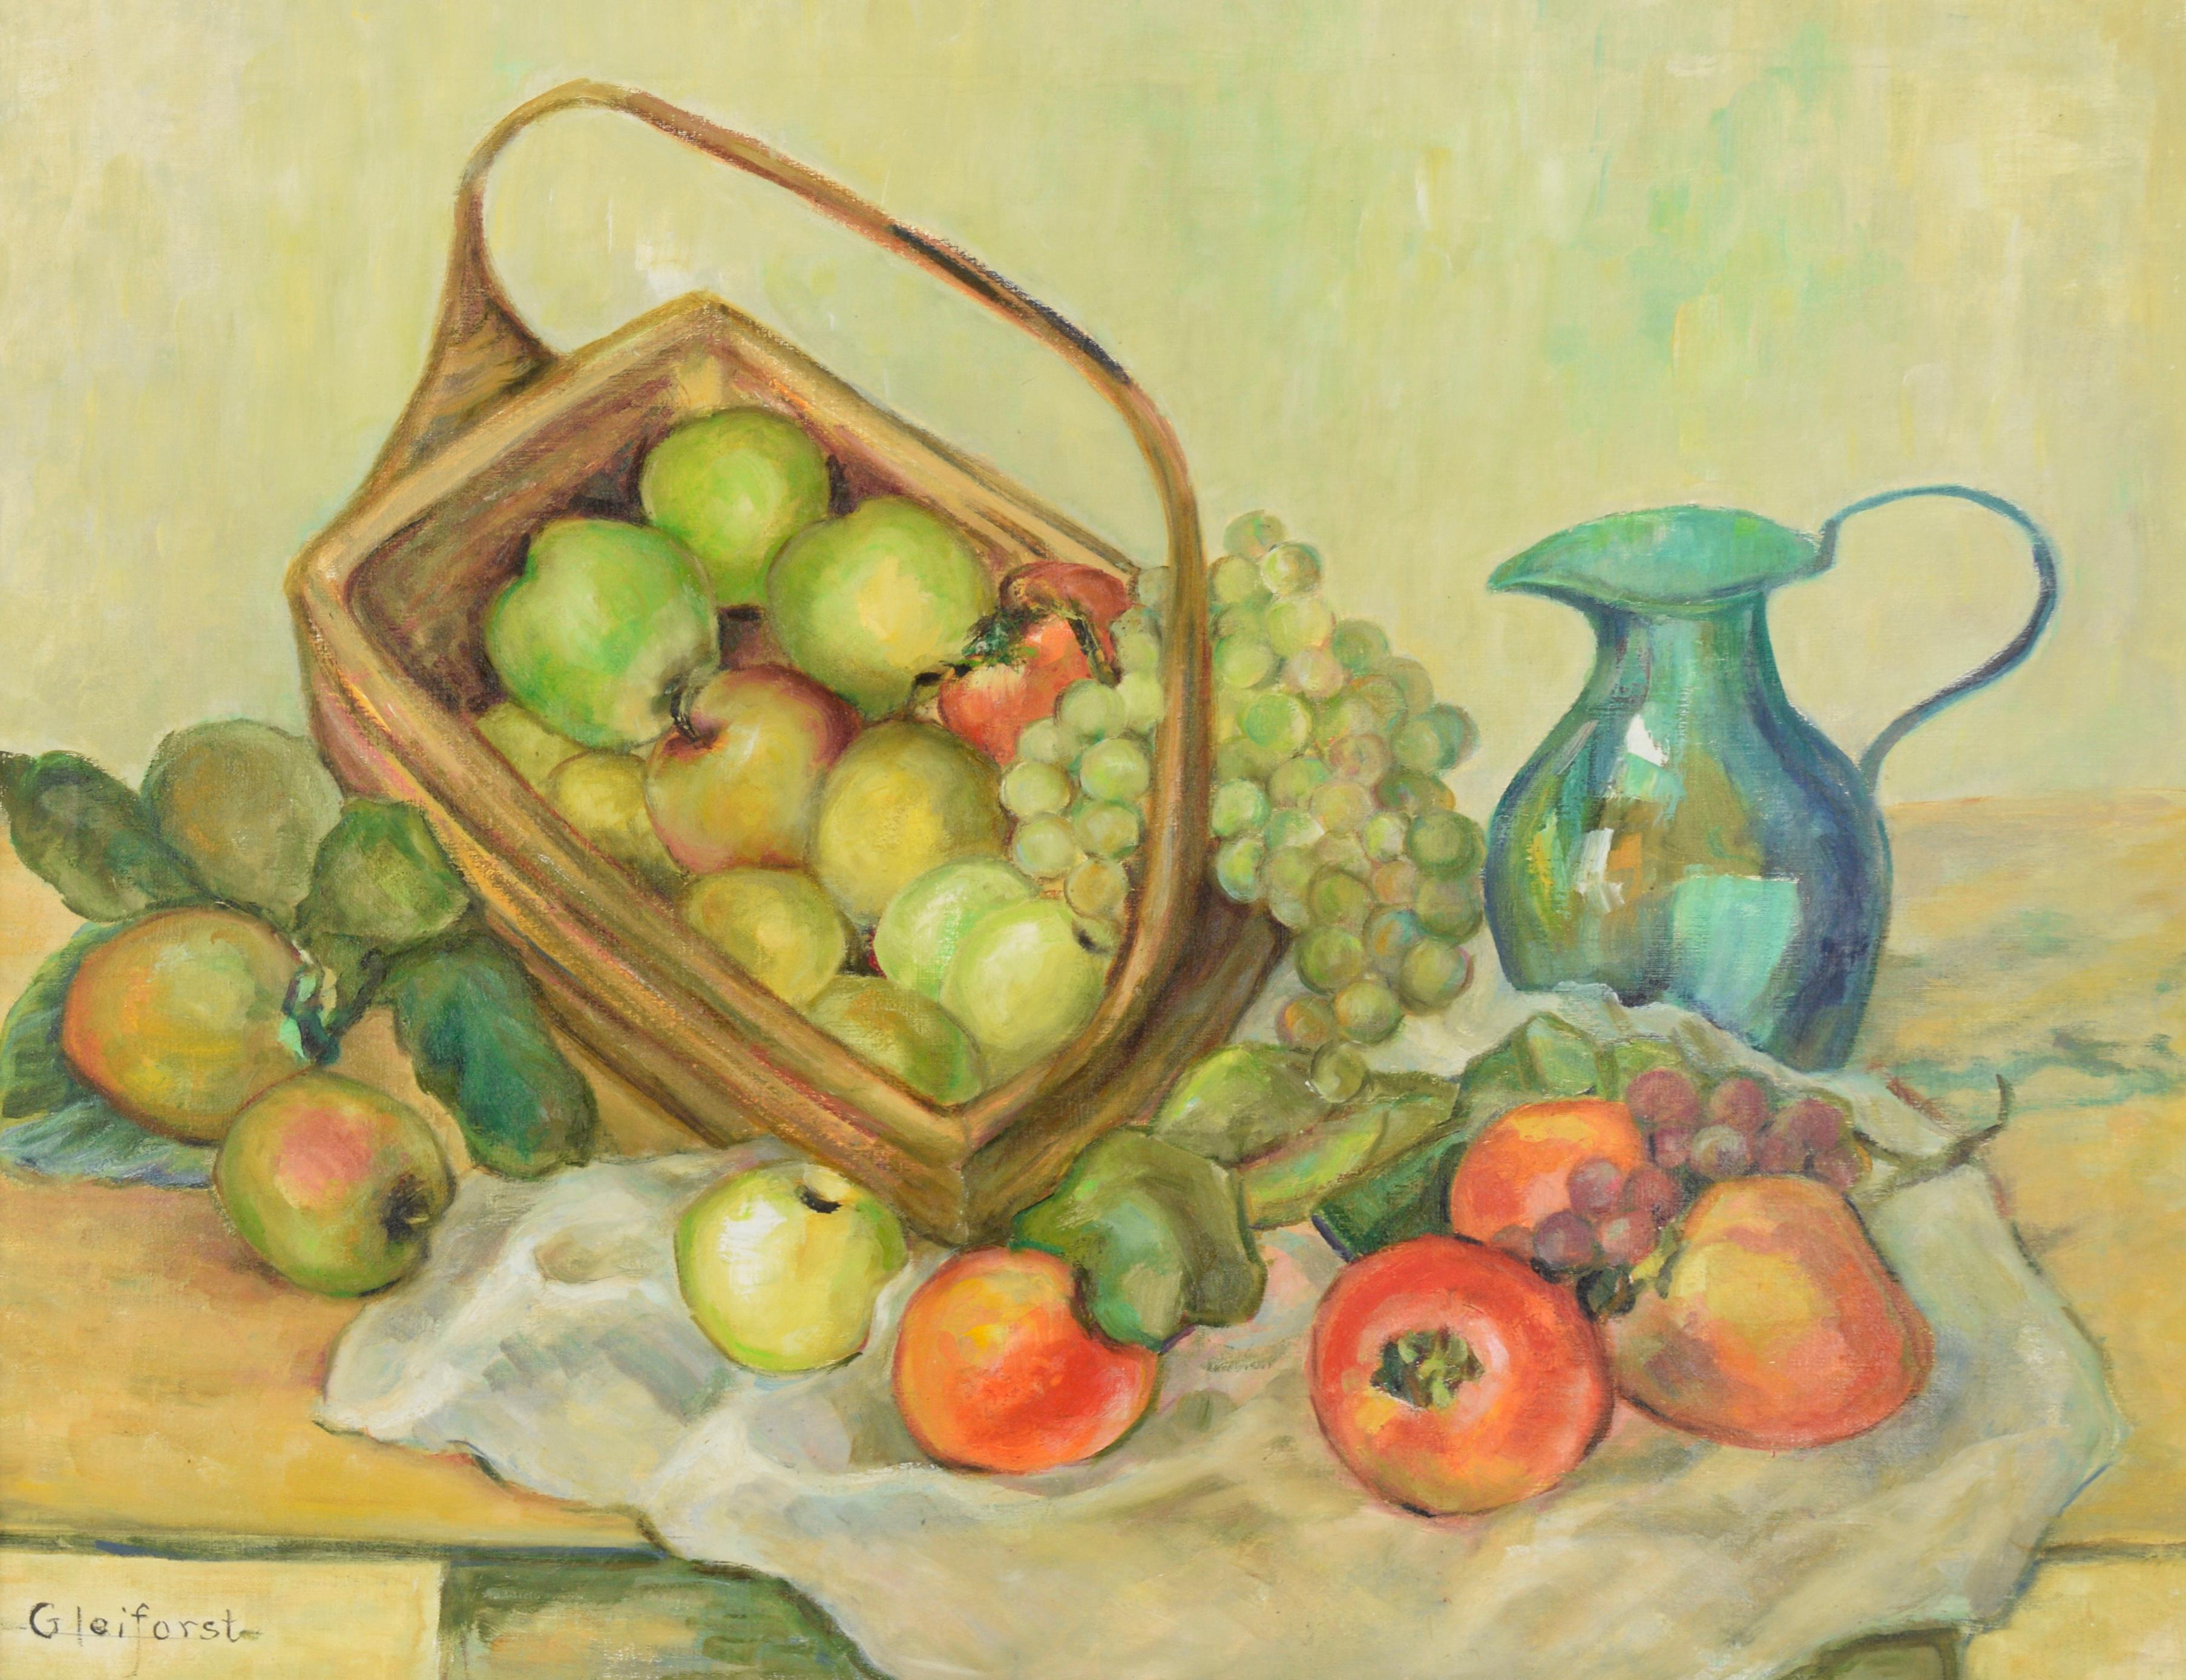 Mid Century Turquoise Pitcher and Fruit Basket Still Life  - Painting by Helen Enoch Gleiforst